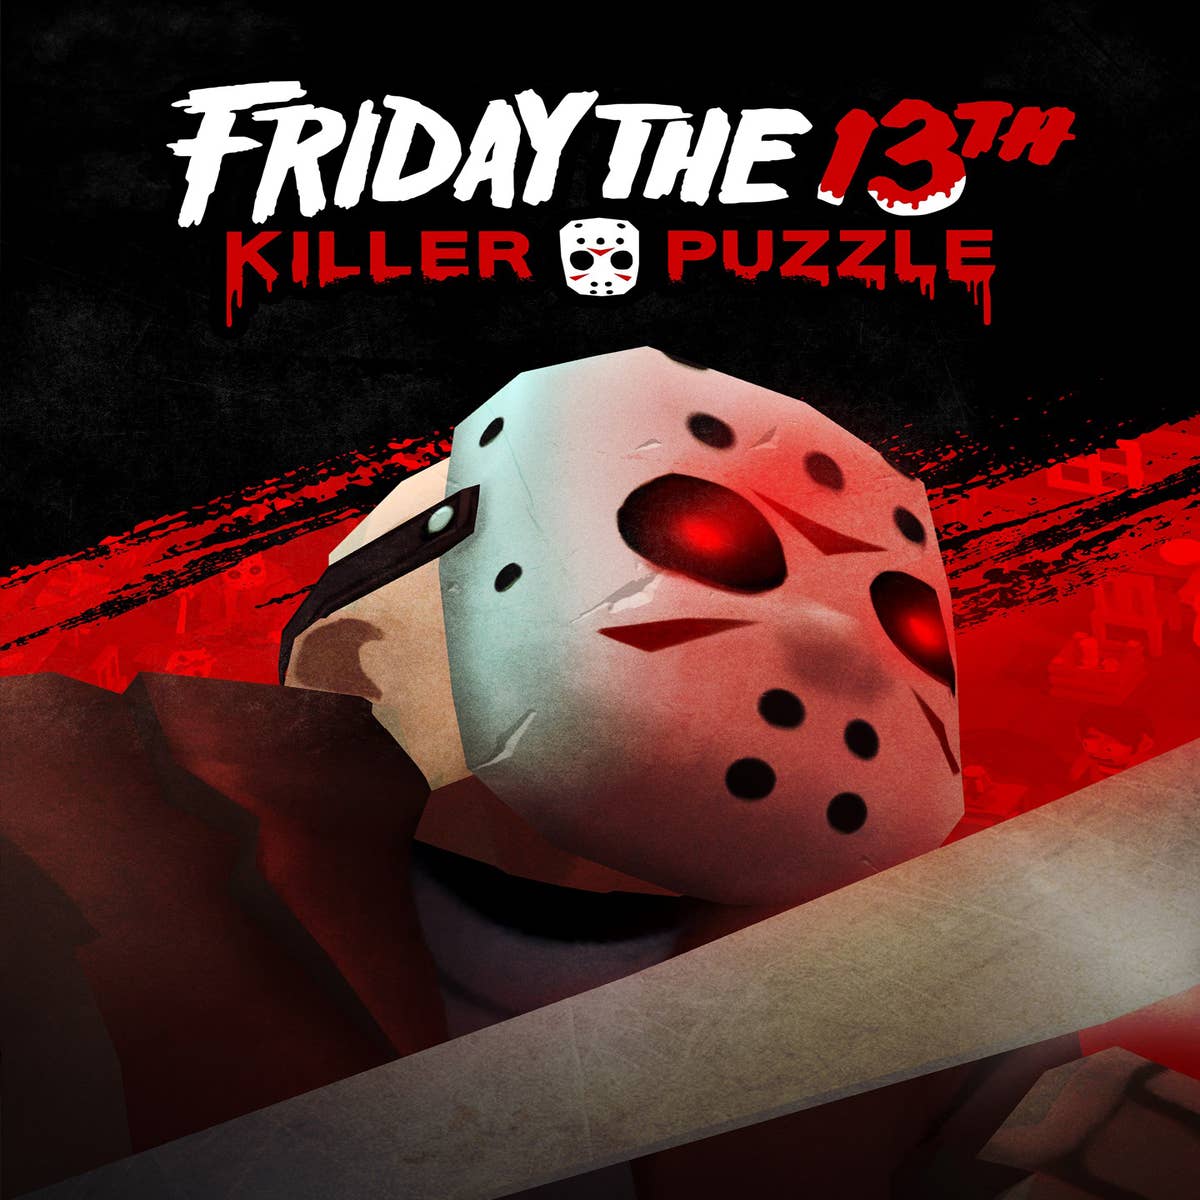 Friday the 13th: Killer Puzzle – Download game for Android/iOS